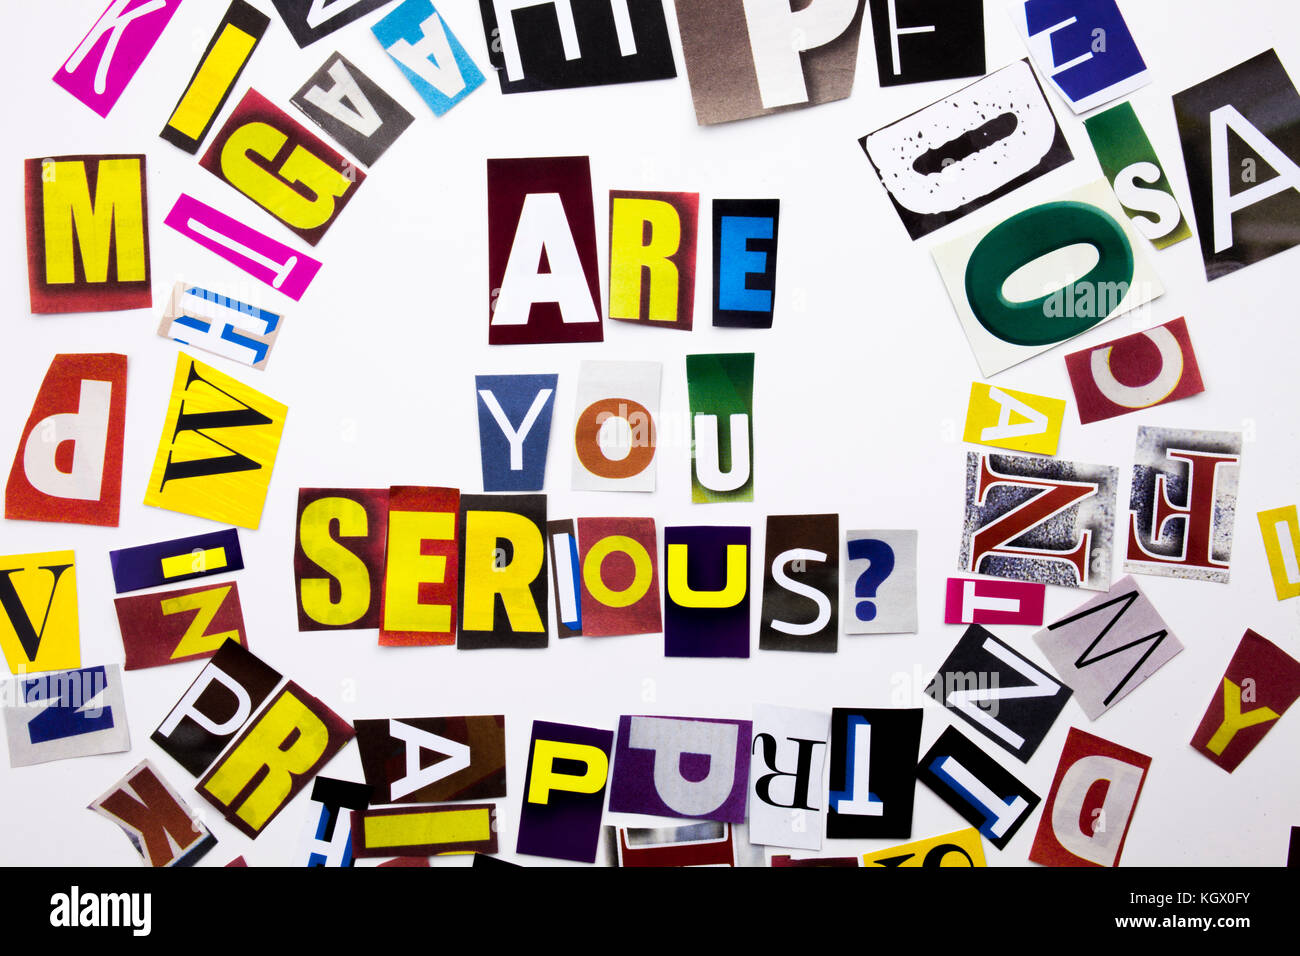 A word writing text showing concept of Are You Serious question made of different magazine newspaper letter for Business case on the white background  Stock Photo